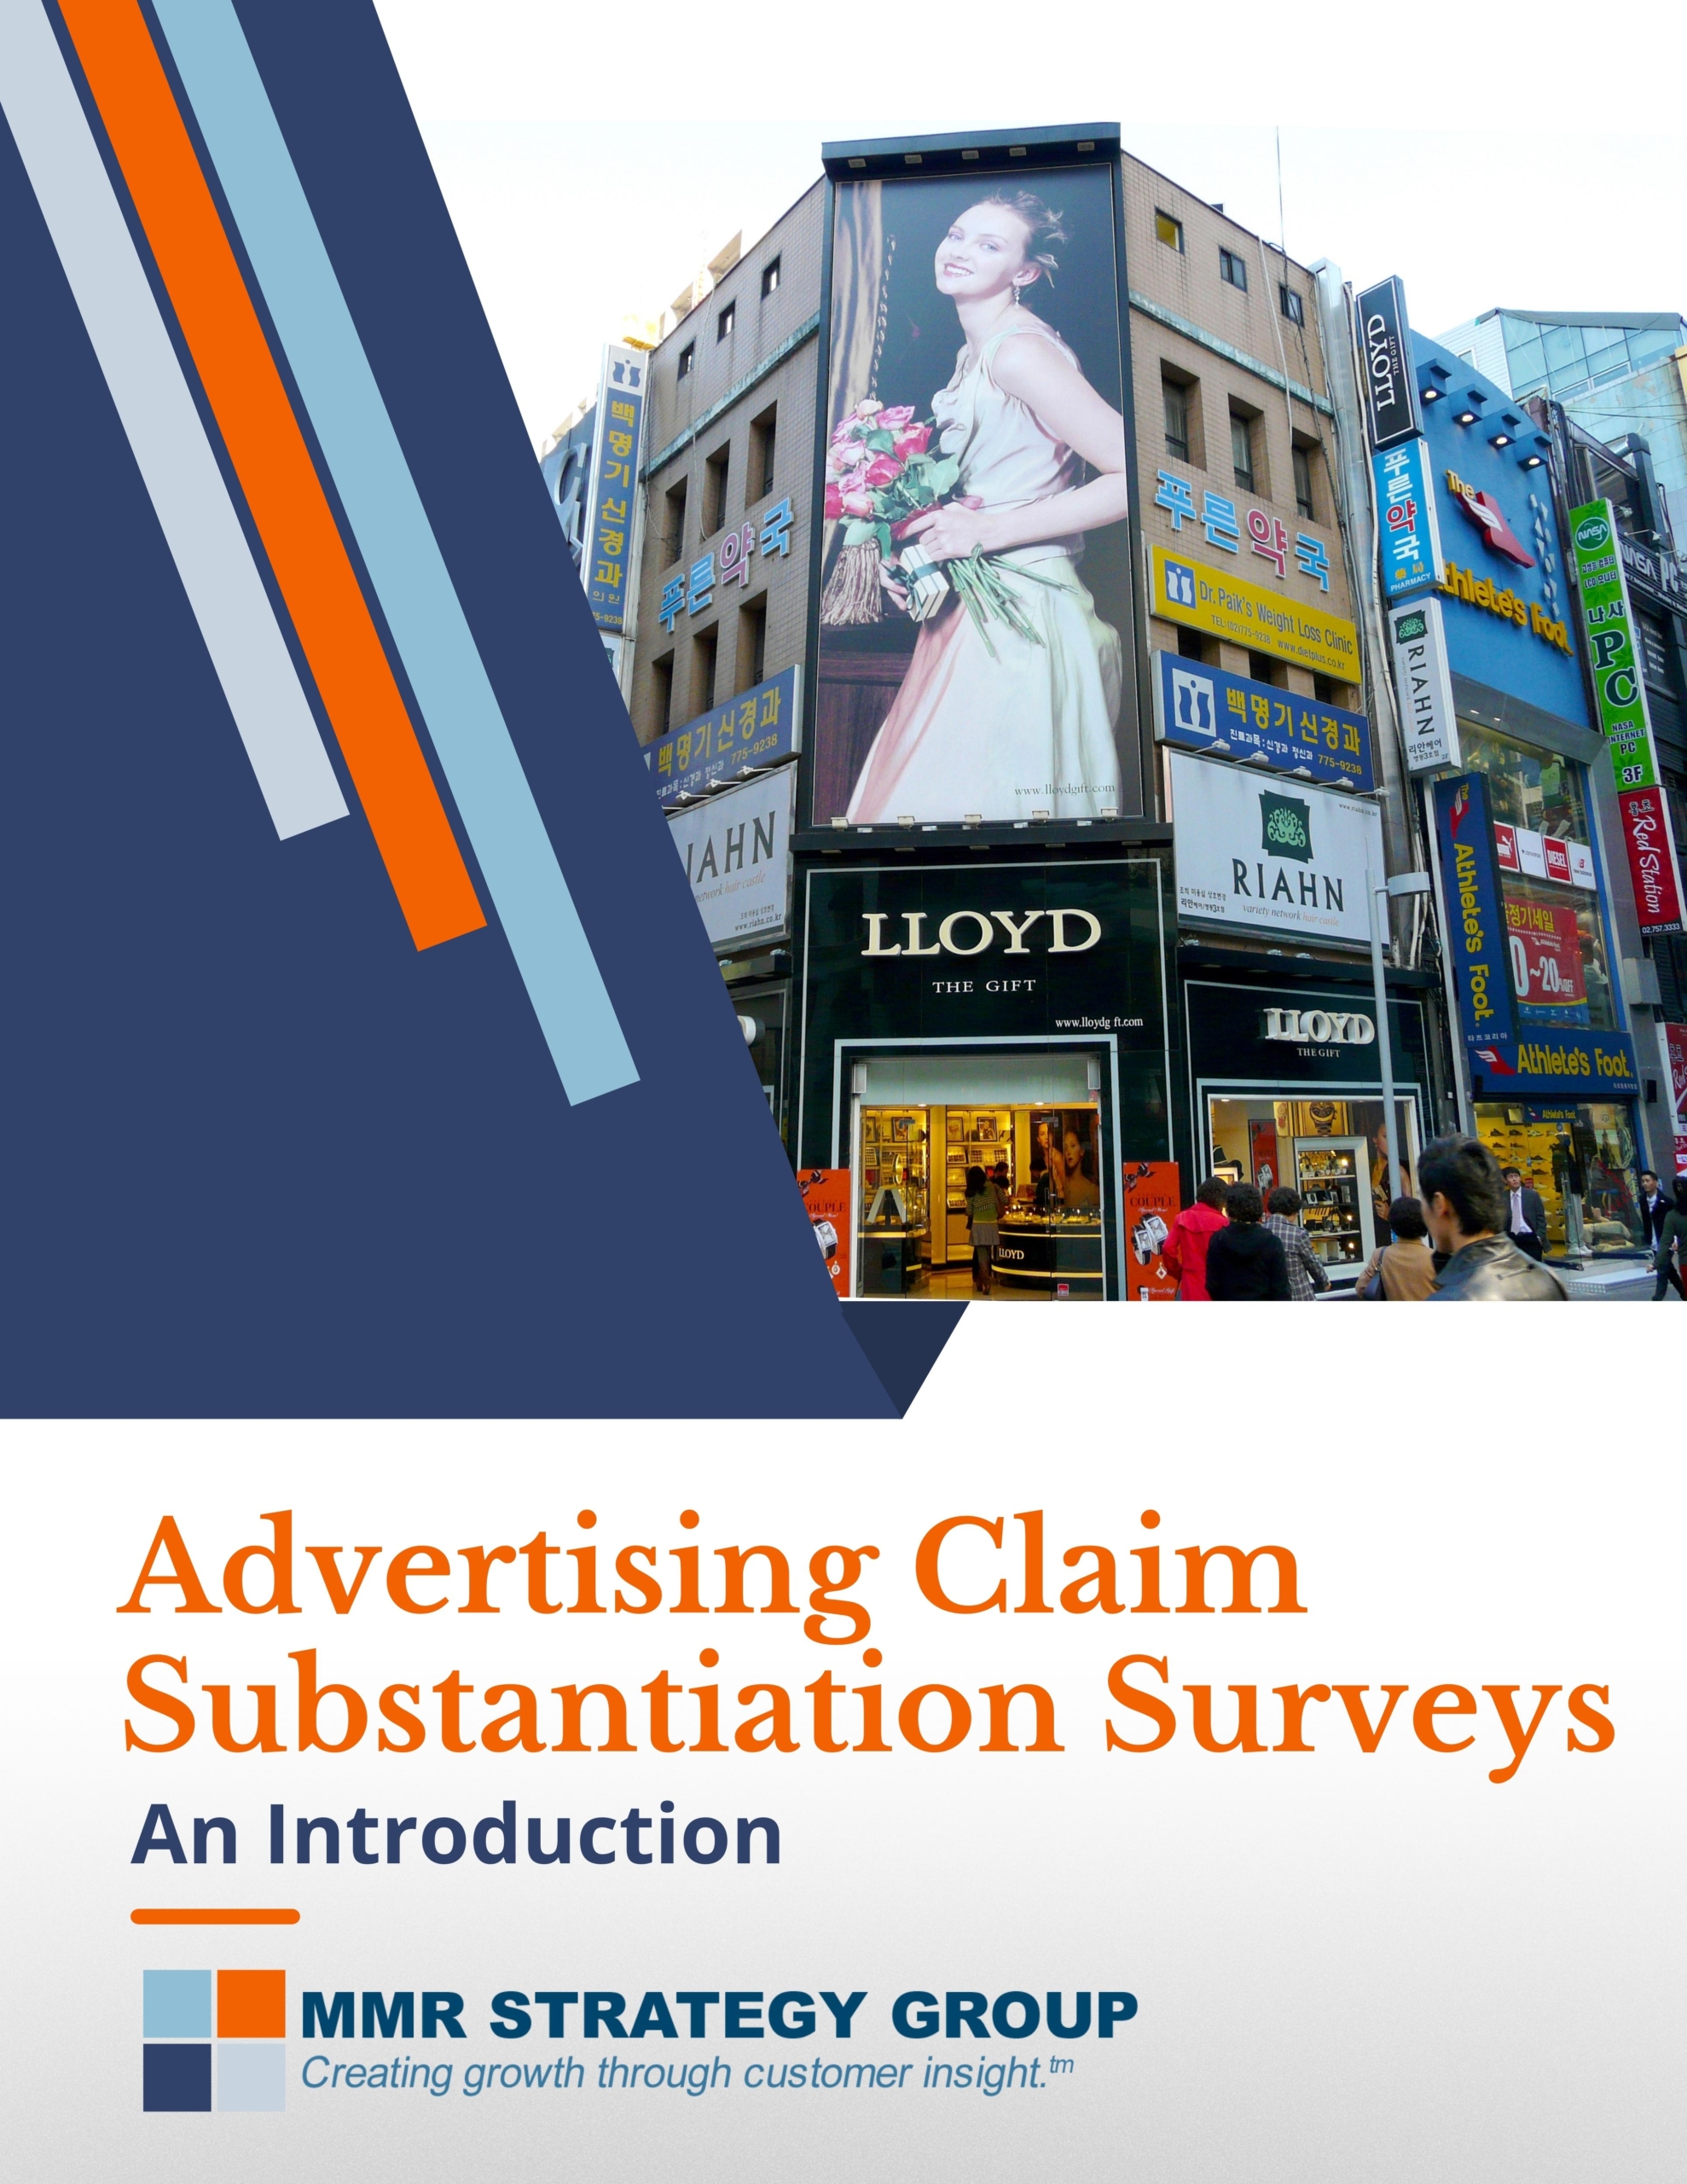 Introduction to Advertising Claim Substantiation Surveys